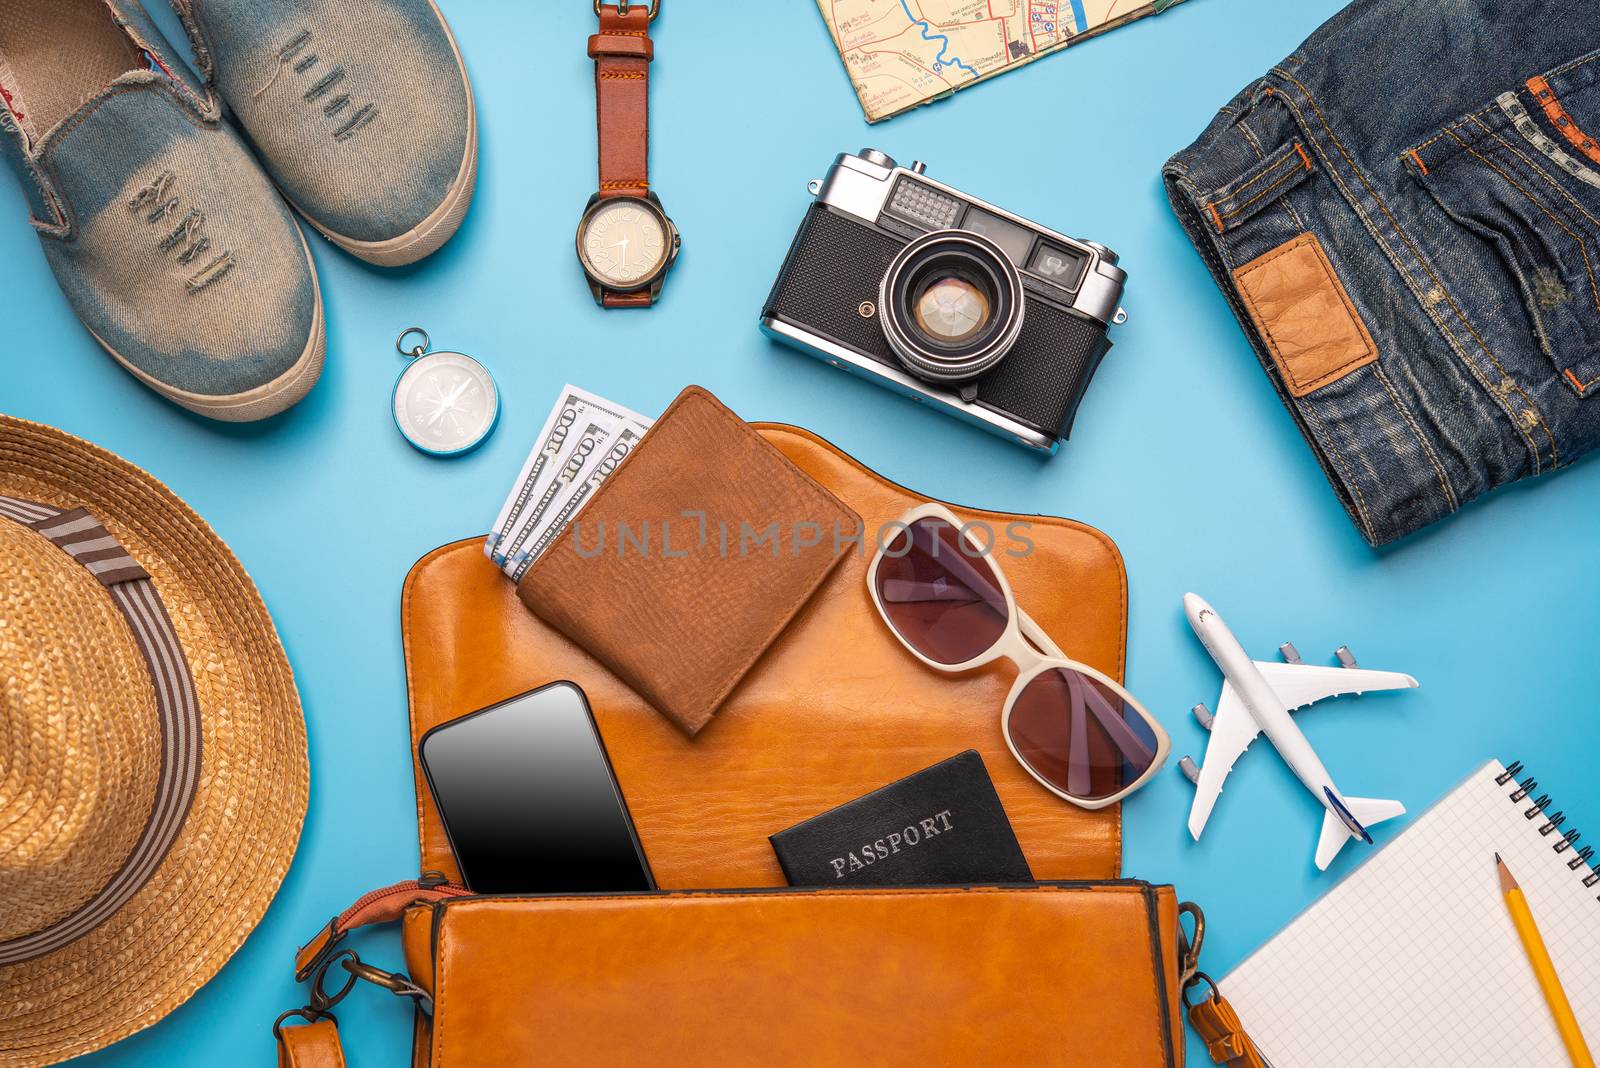 Travel accessories costumes. Passports, luggage, The cost of travel maps prepared for the trip